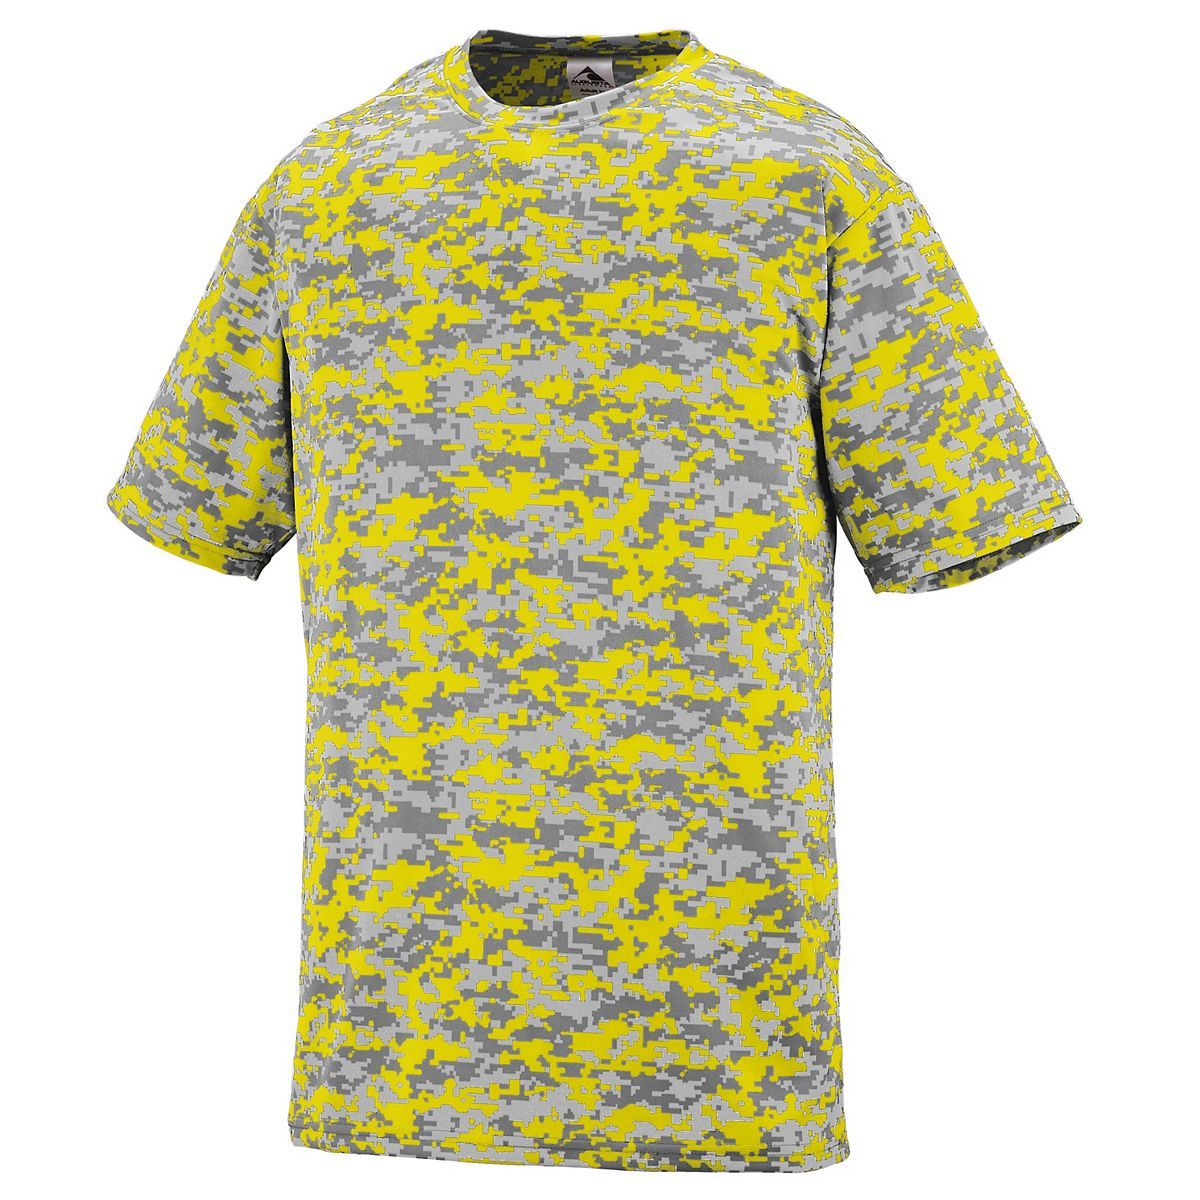 Augusta Sportswear Youth Digi Camo Wicking T-Shirt in Power Yellow Digi  -Part of the Youth, Youth-Tee-Shirt, T-Shirts, Augusta-Products, Shirts product lines at KanaleyCreations.com